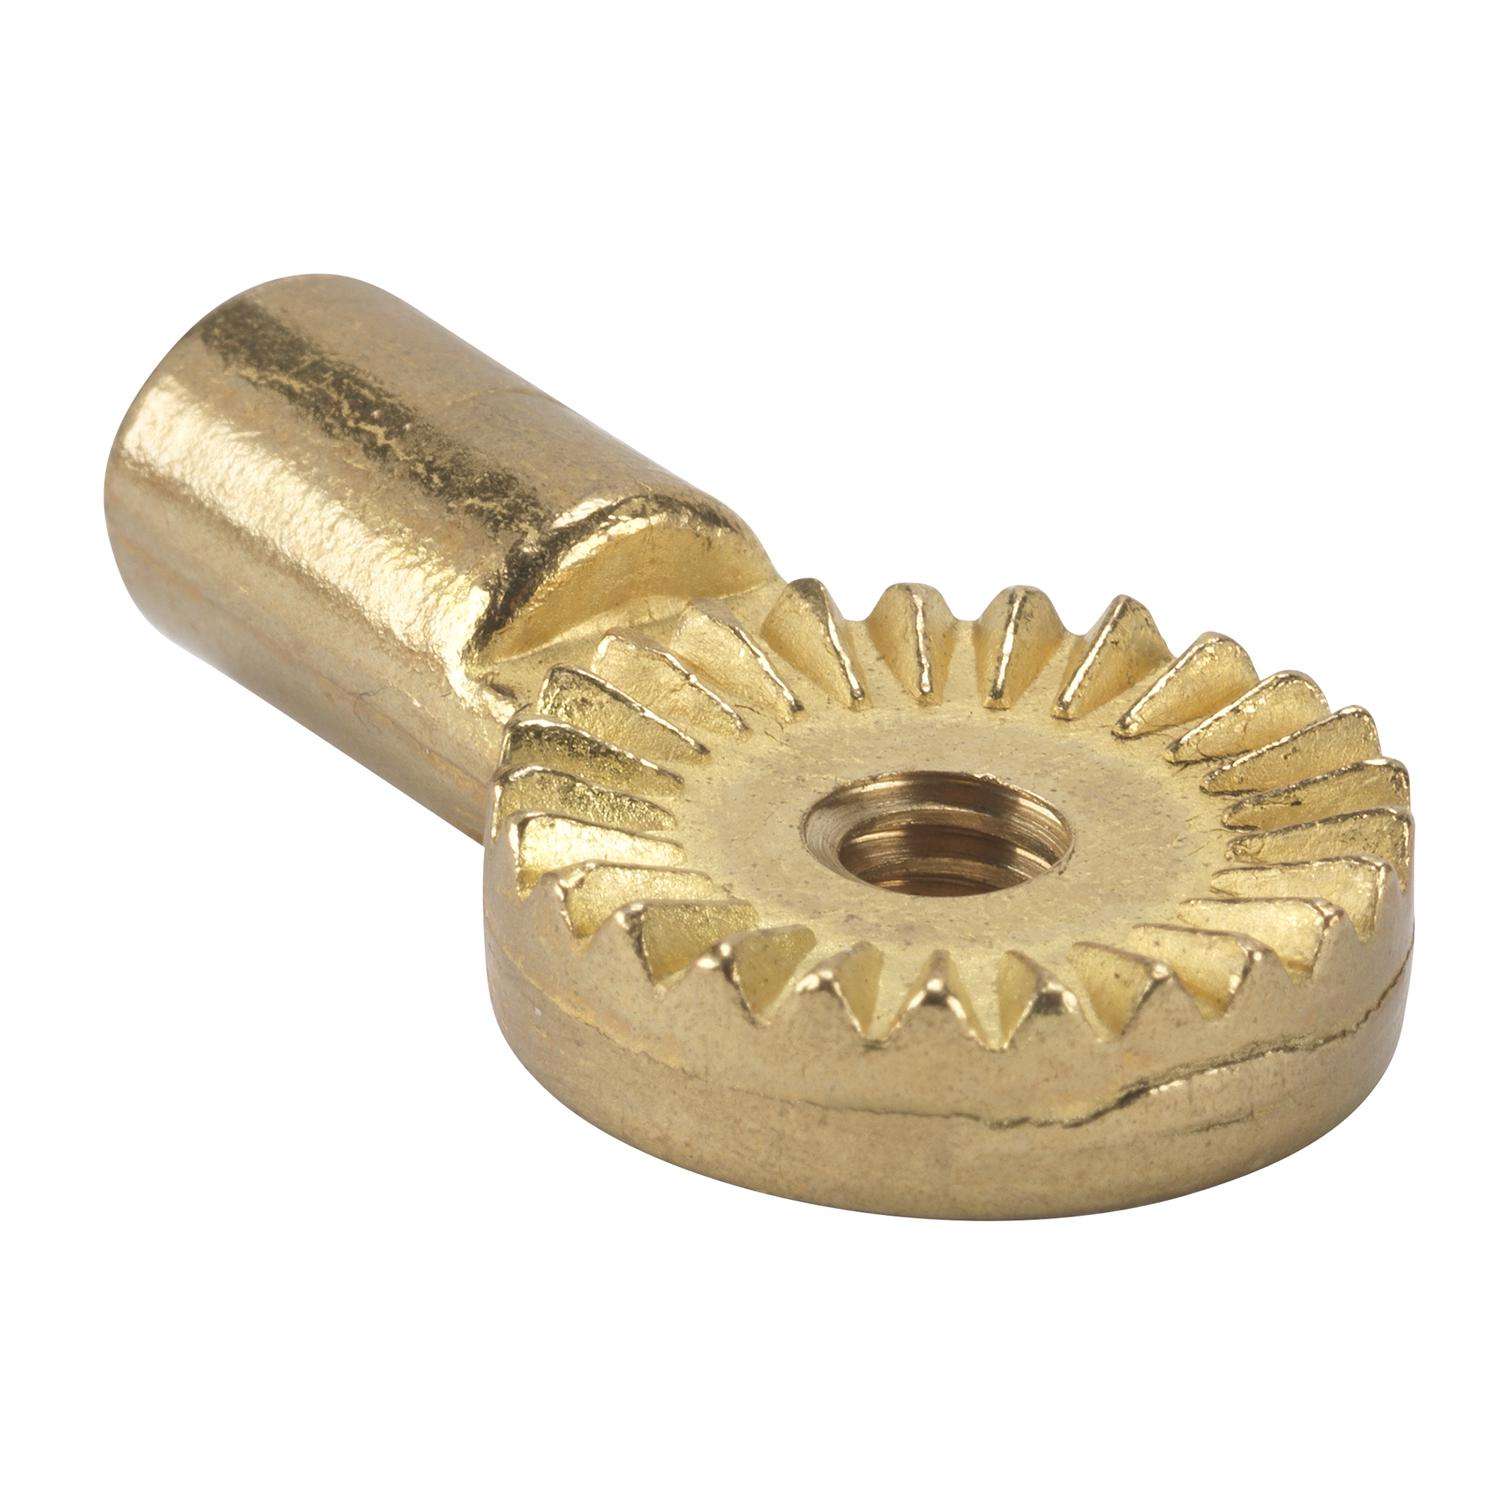 Joanna's Bag Spa - Brass is a common hardware that we find on most